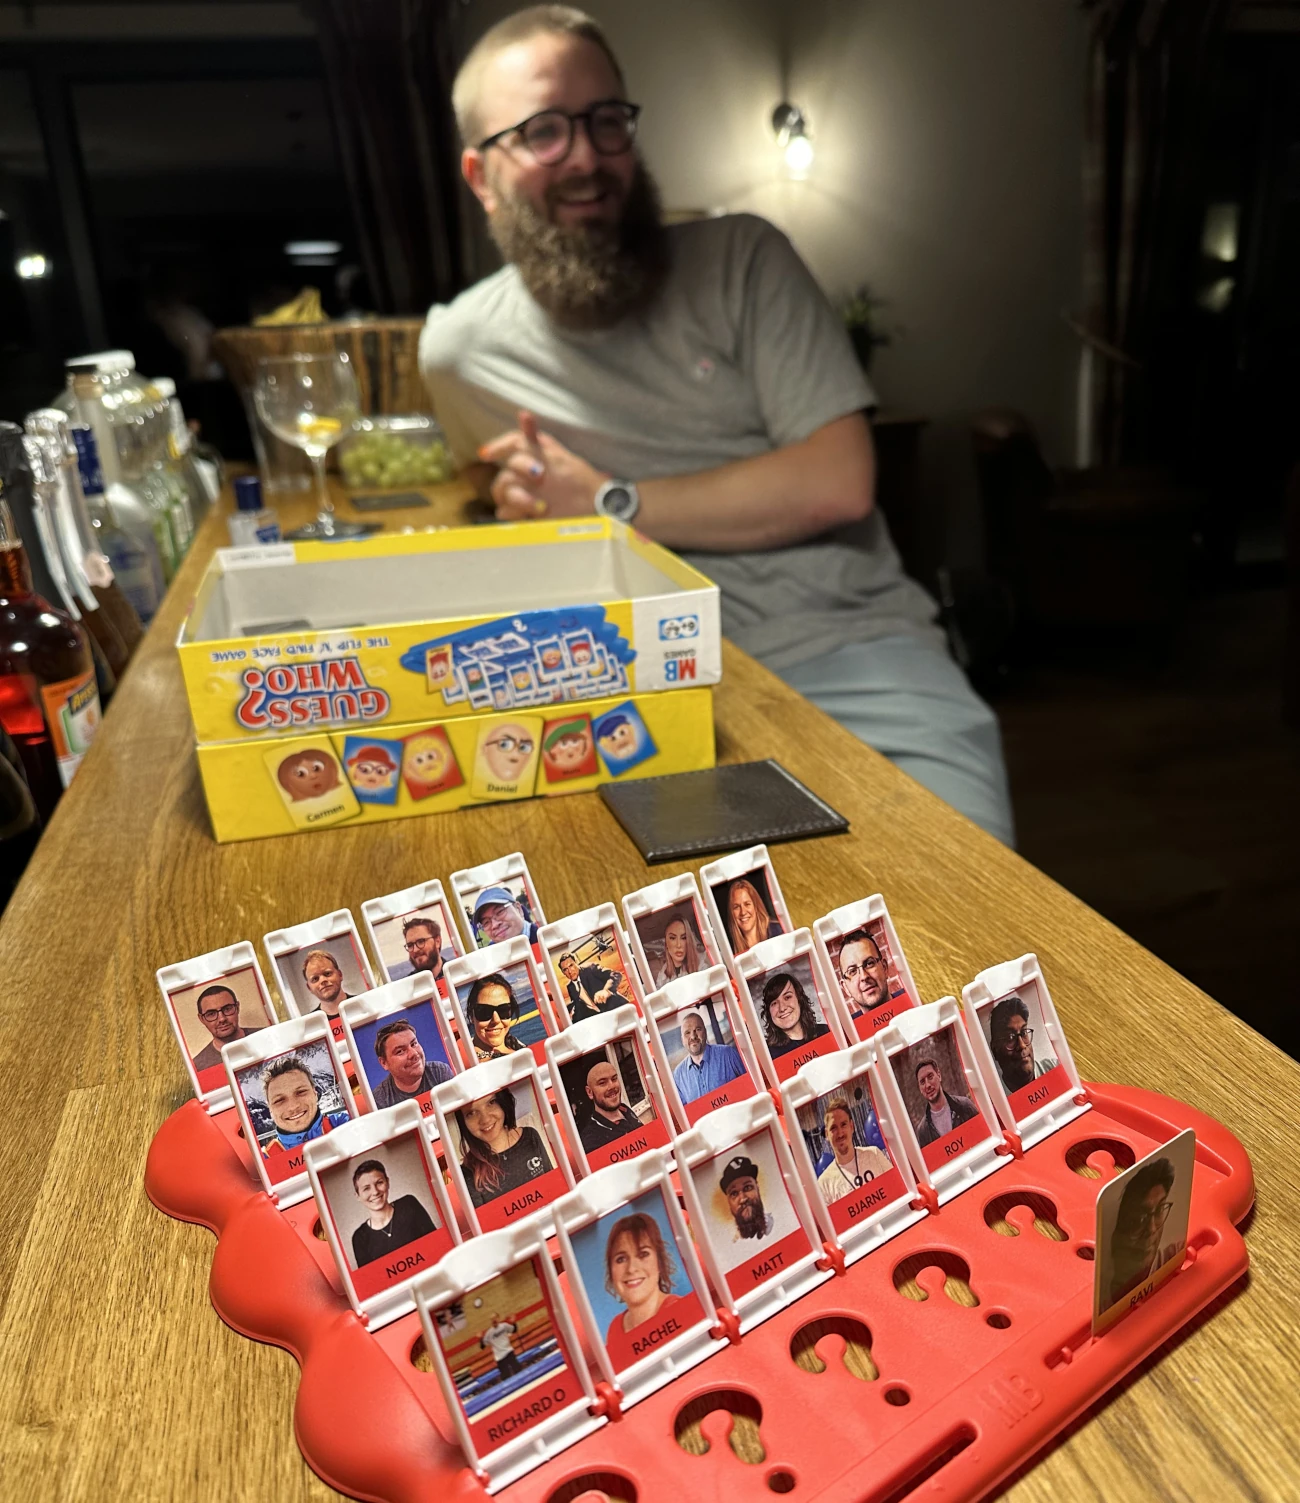 A photograph taken by Joe's Guess Who opponent, with a custom Guess Who board made up of CODECABIN attendees. Joe is sat opposite the photographer at the bar, laughing. Bottles of drink can be seen stacked along the bar.